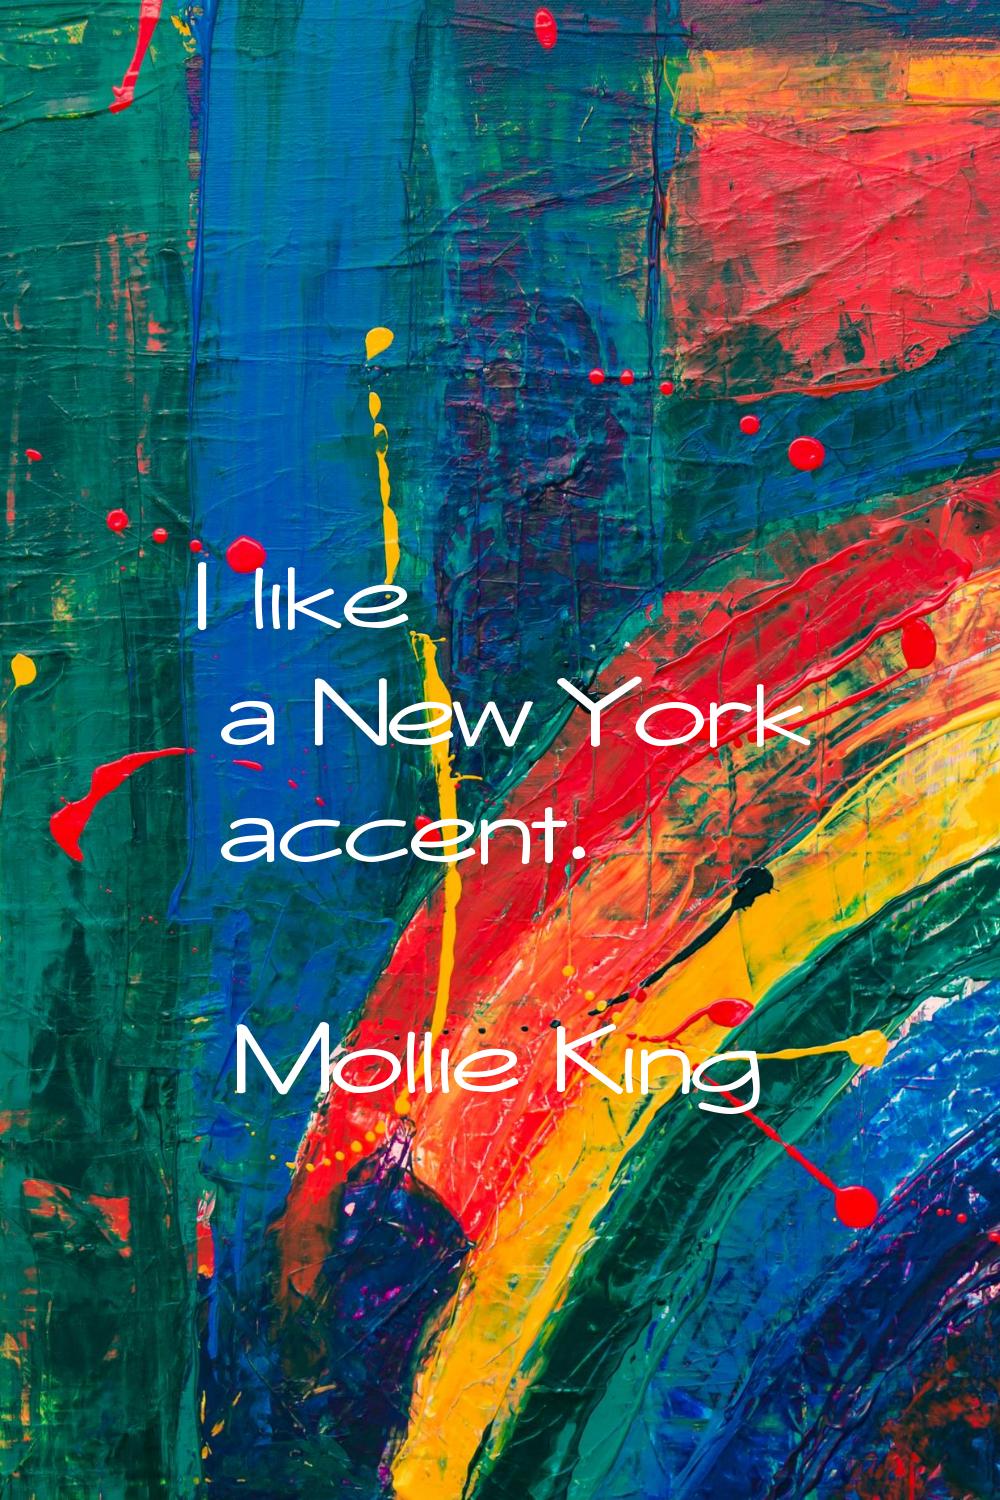 I like a New York accent.